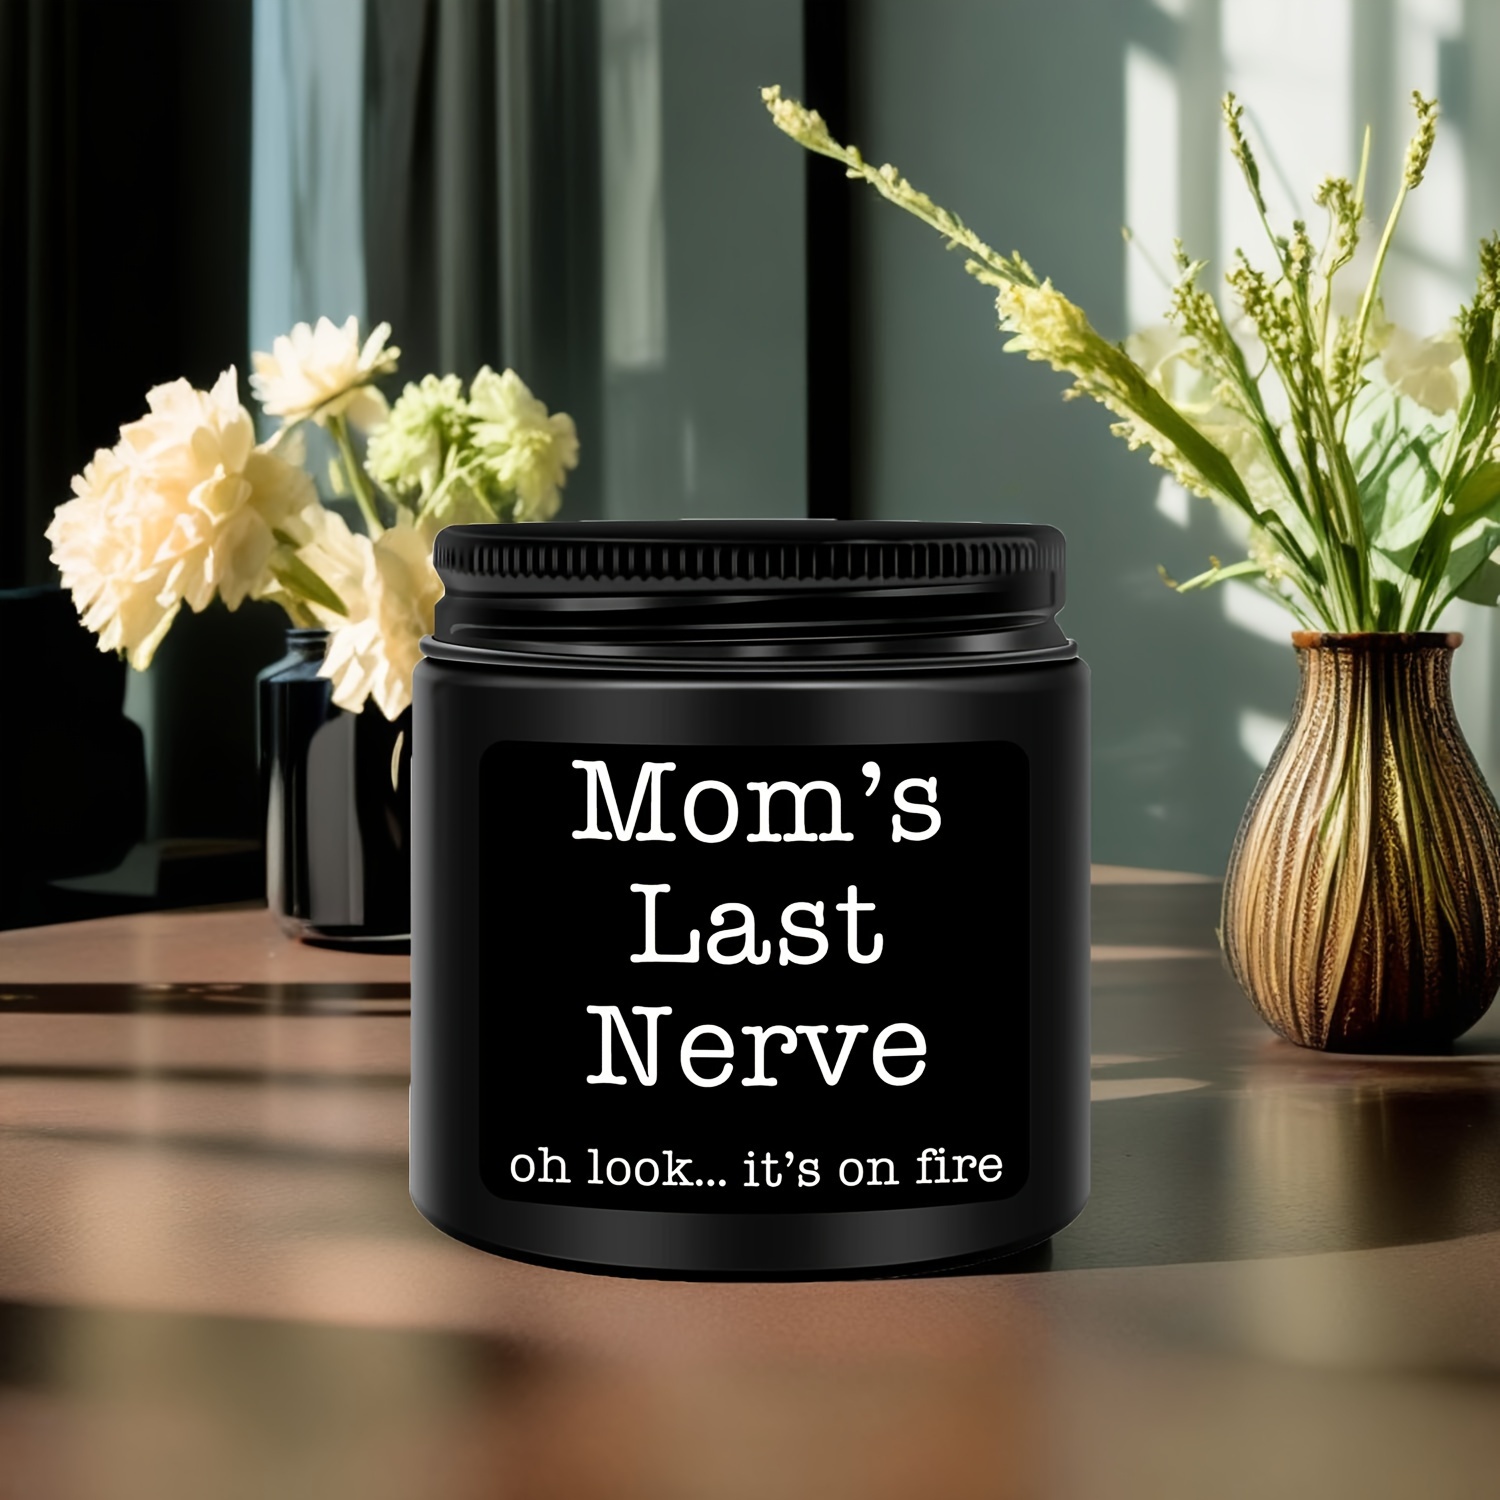 

Lavender Scented Candles, Gifts For Mom, Unique Mom Gifts, Mothers Day, Valentines, Birthday Gifts For Mom From Daughters, Lavender Scented Moms Last Nerve Candles